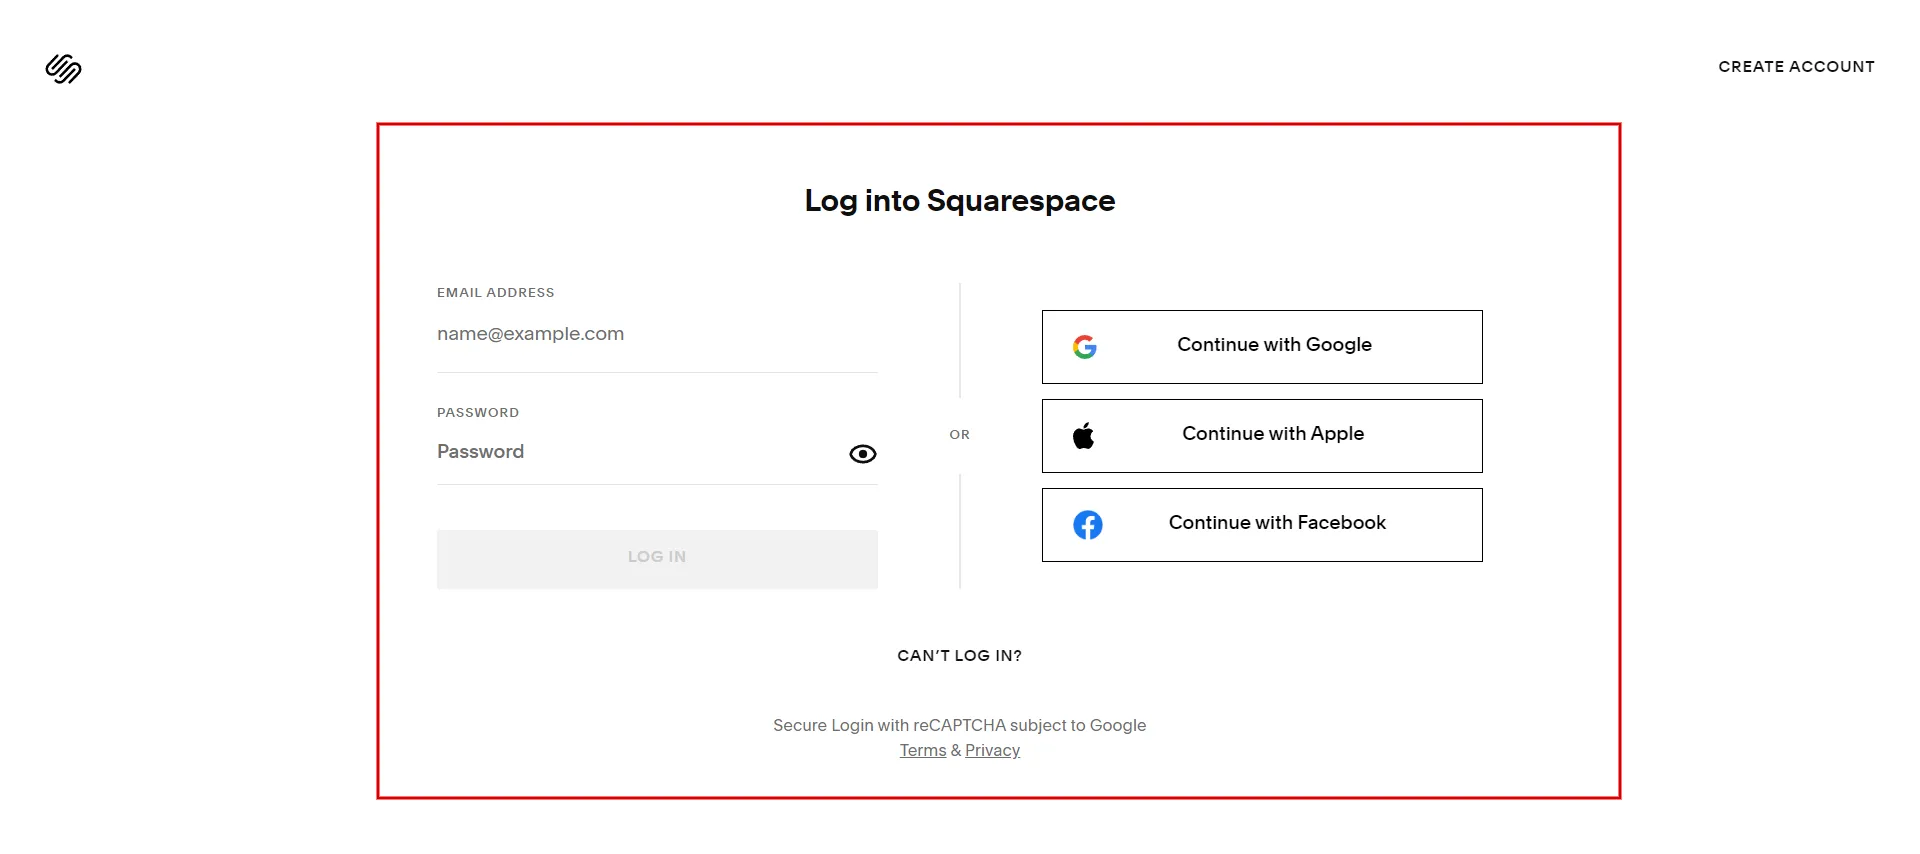 Log in Squarespace account